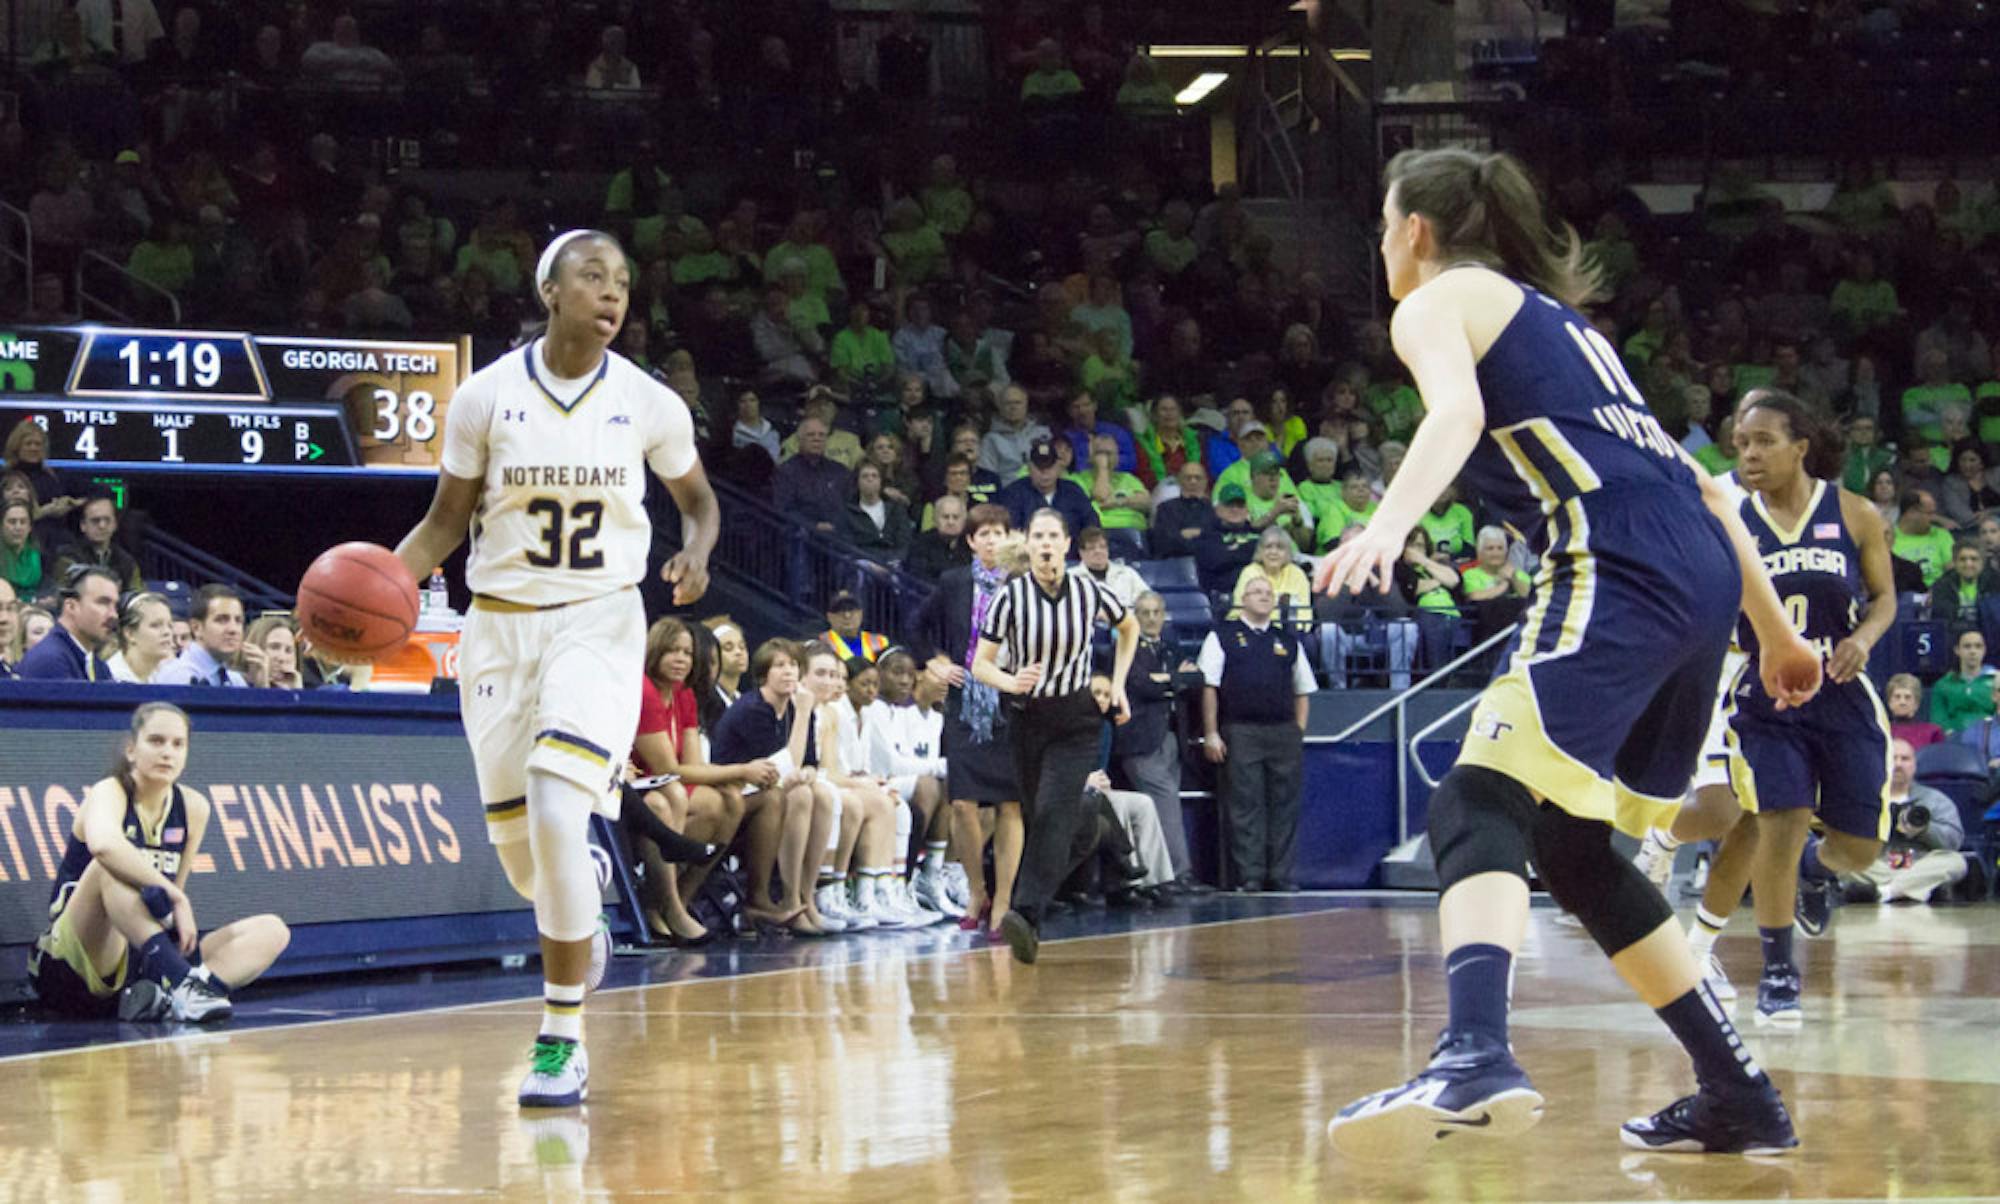 Irish junior guard Jewell Loyd dribbles the ball upcourt during Notre Dame’s 89-76 victory against Georgia Tech on Thursday at Purcell Pavilion.